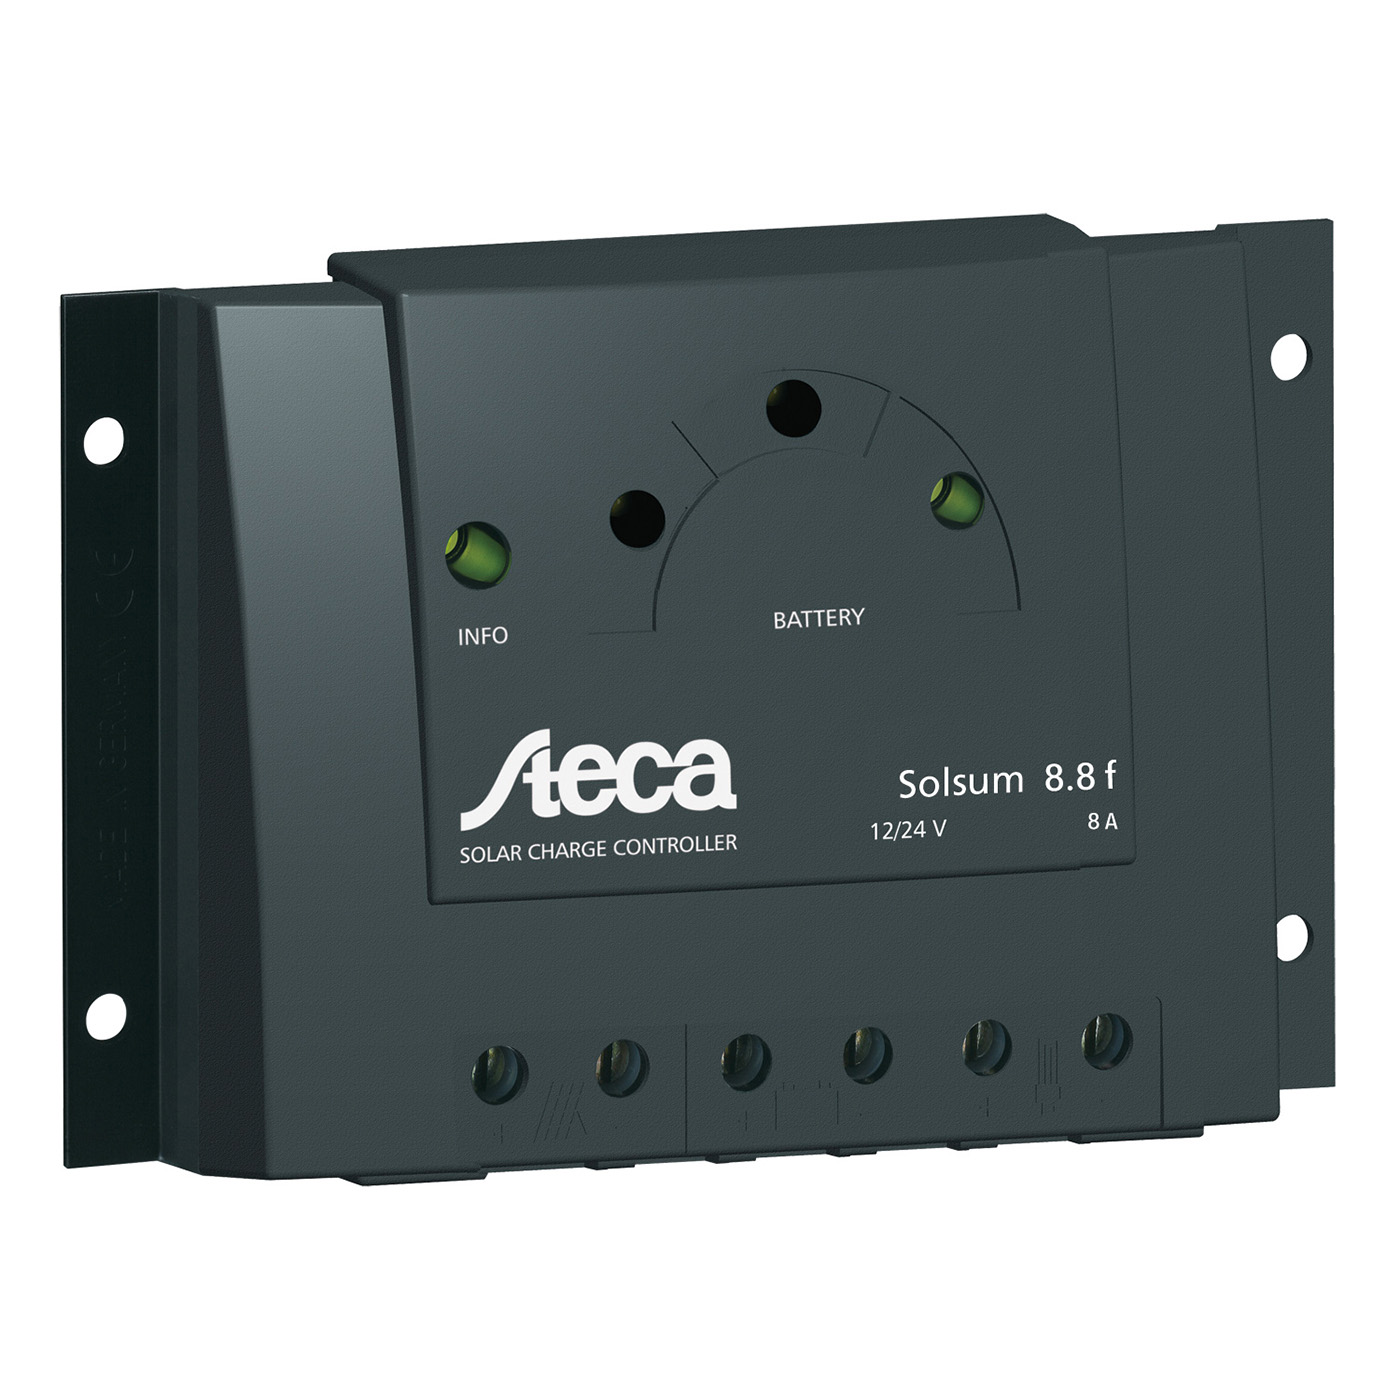 Steca Solsum 8.8F - 8A Solar Charge Controller